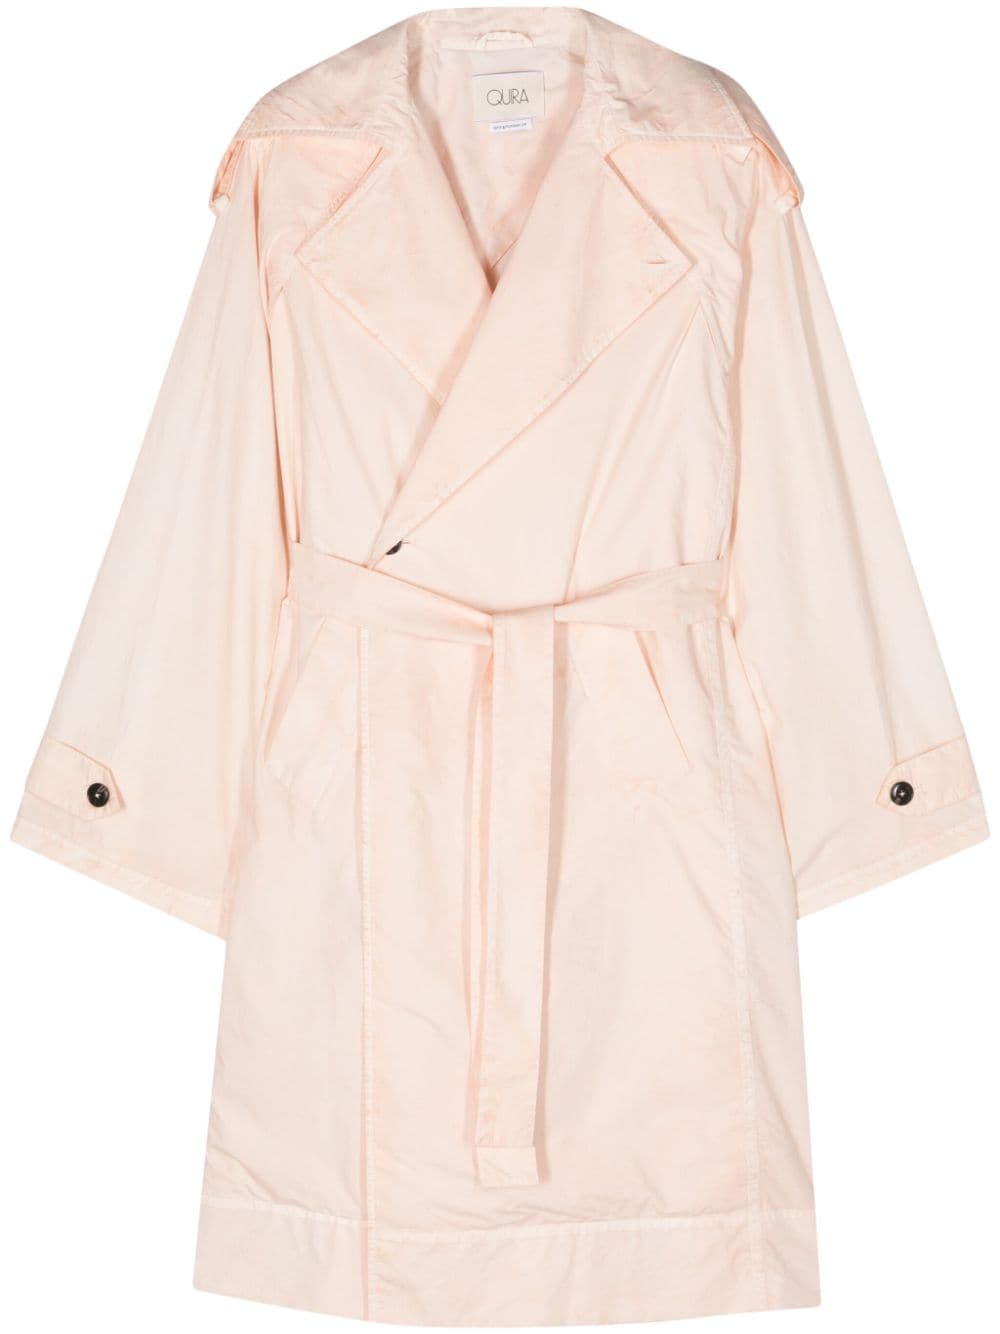 QUIRA cut-out belted trench coat - Pink von QUIRA